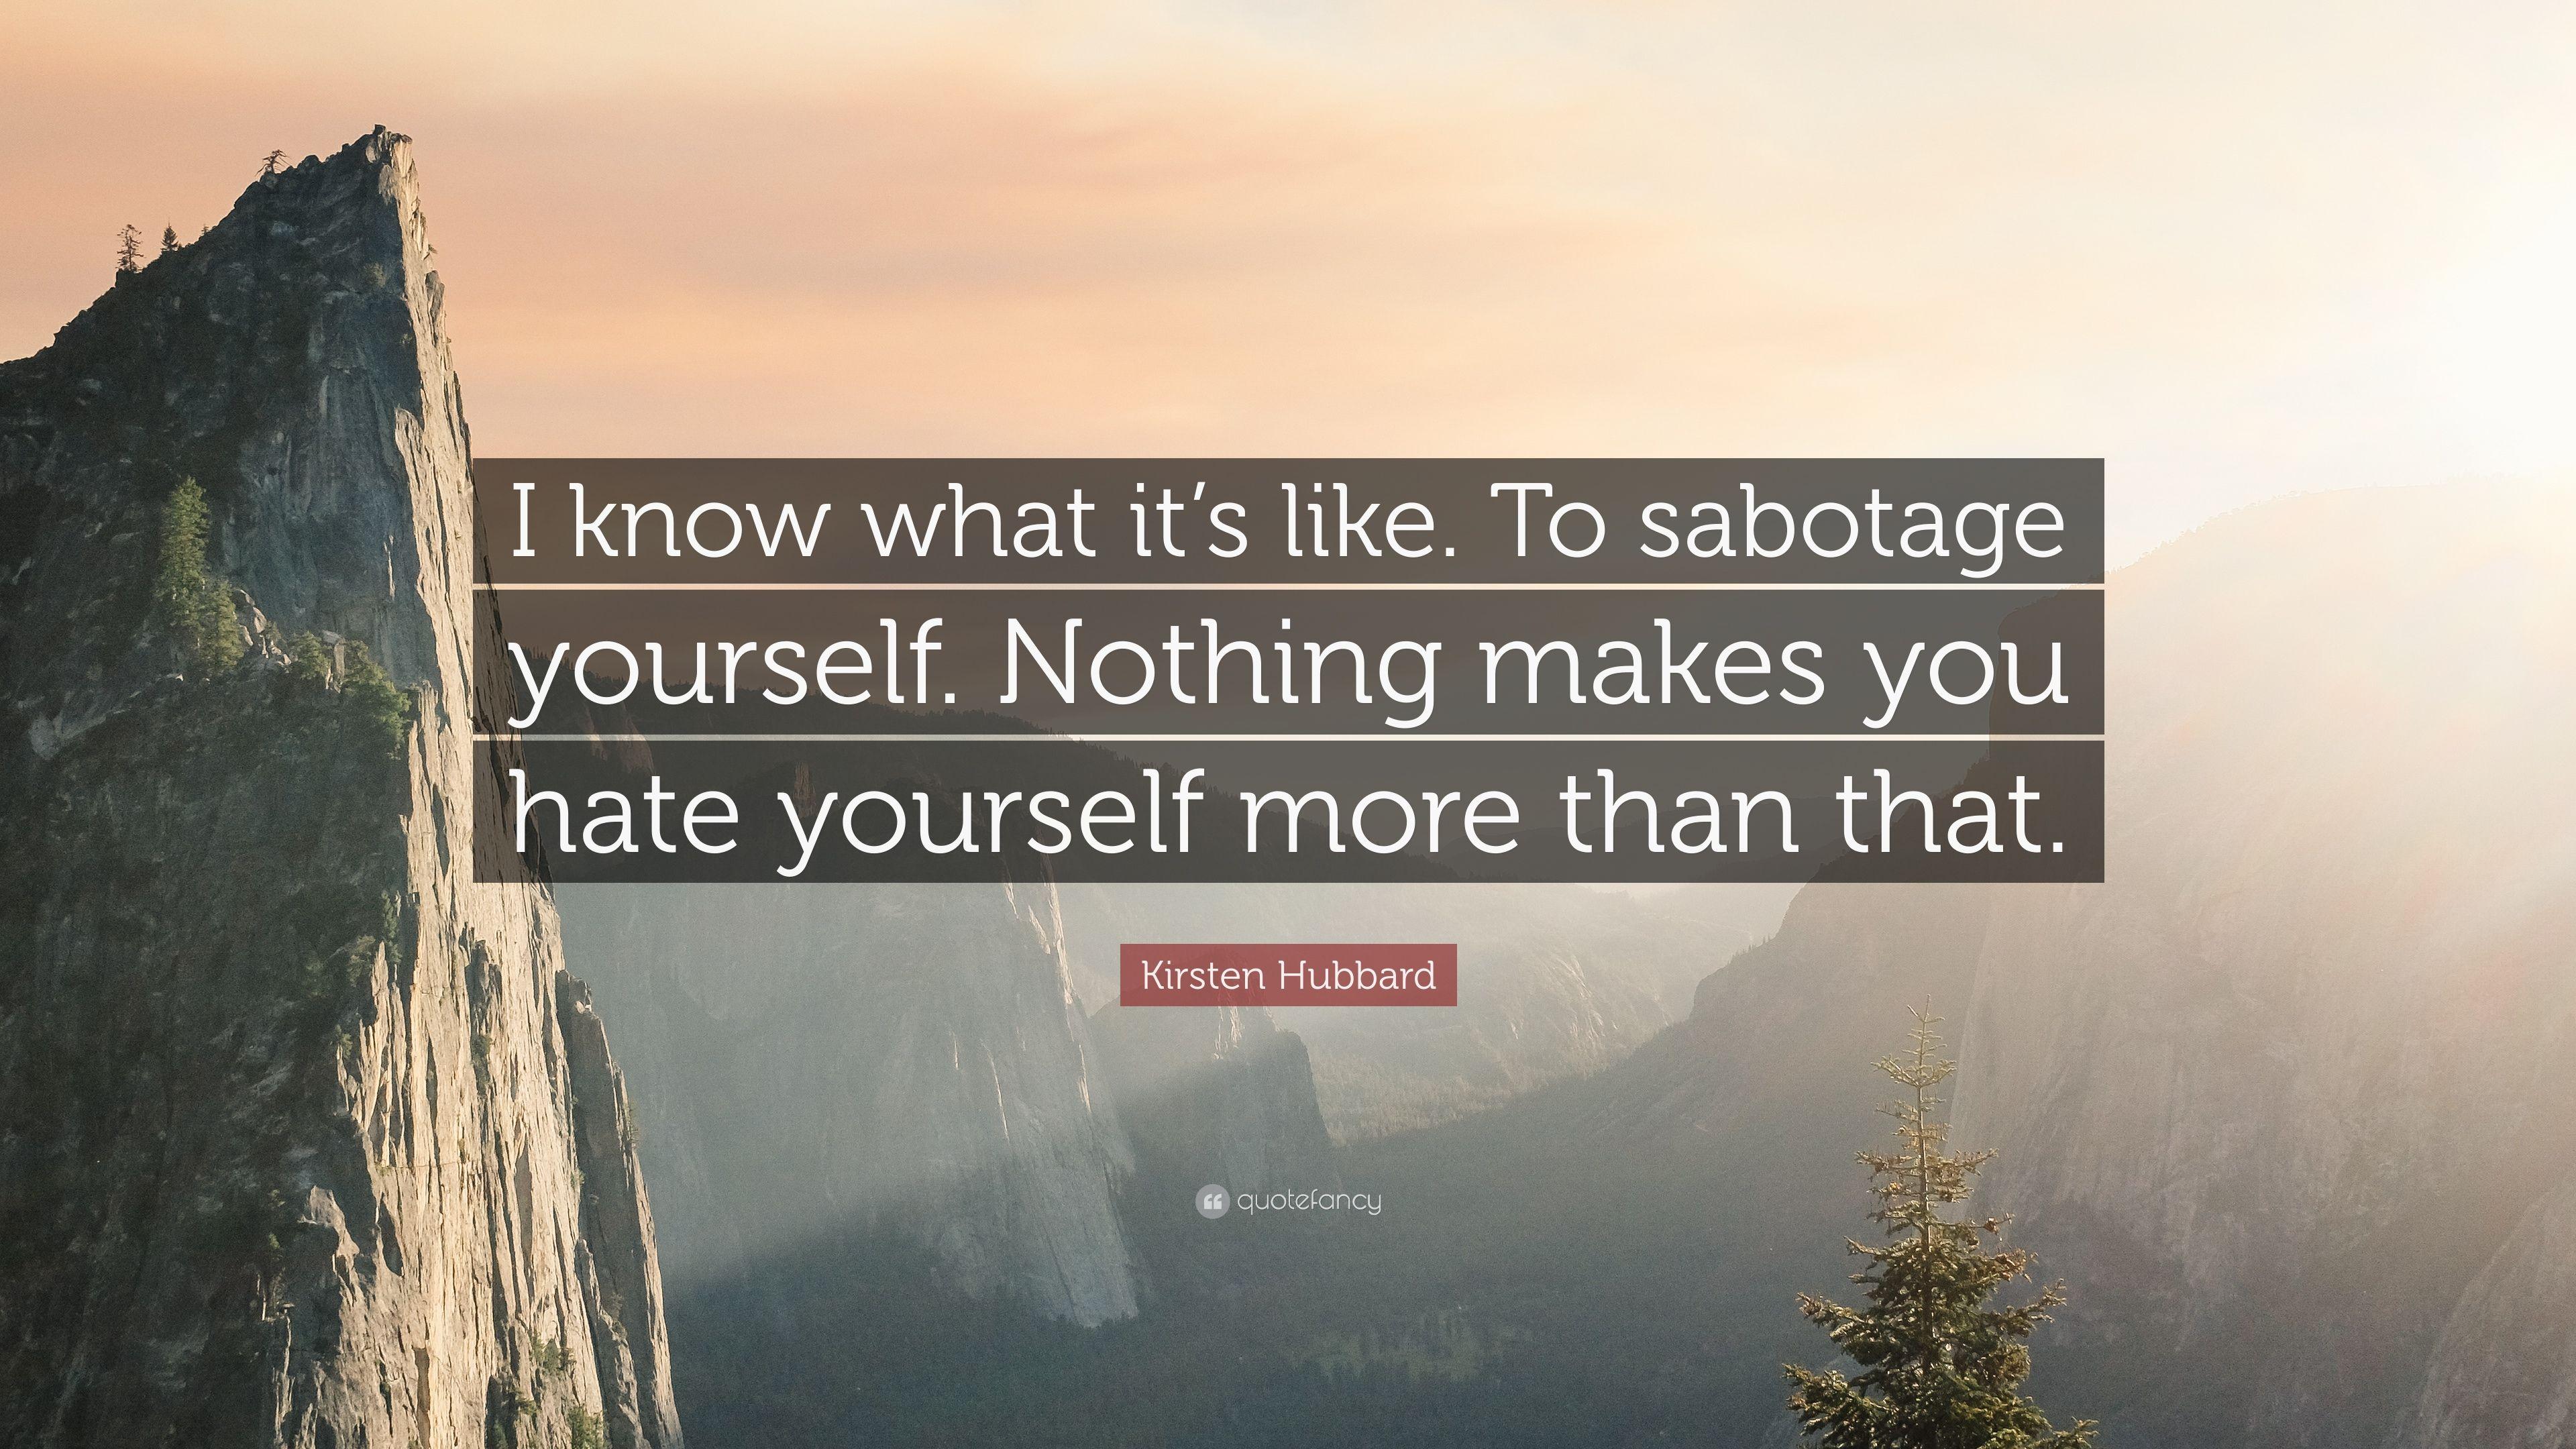 Kirsten Hubbard Quote: “I know what it's like. To sabotage yourself